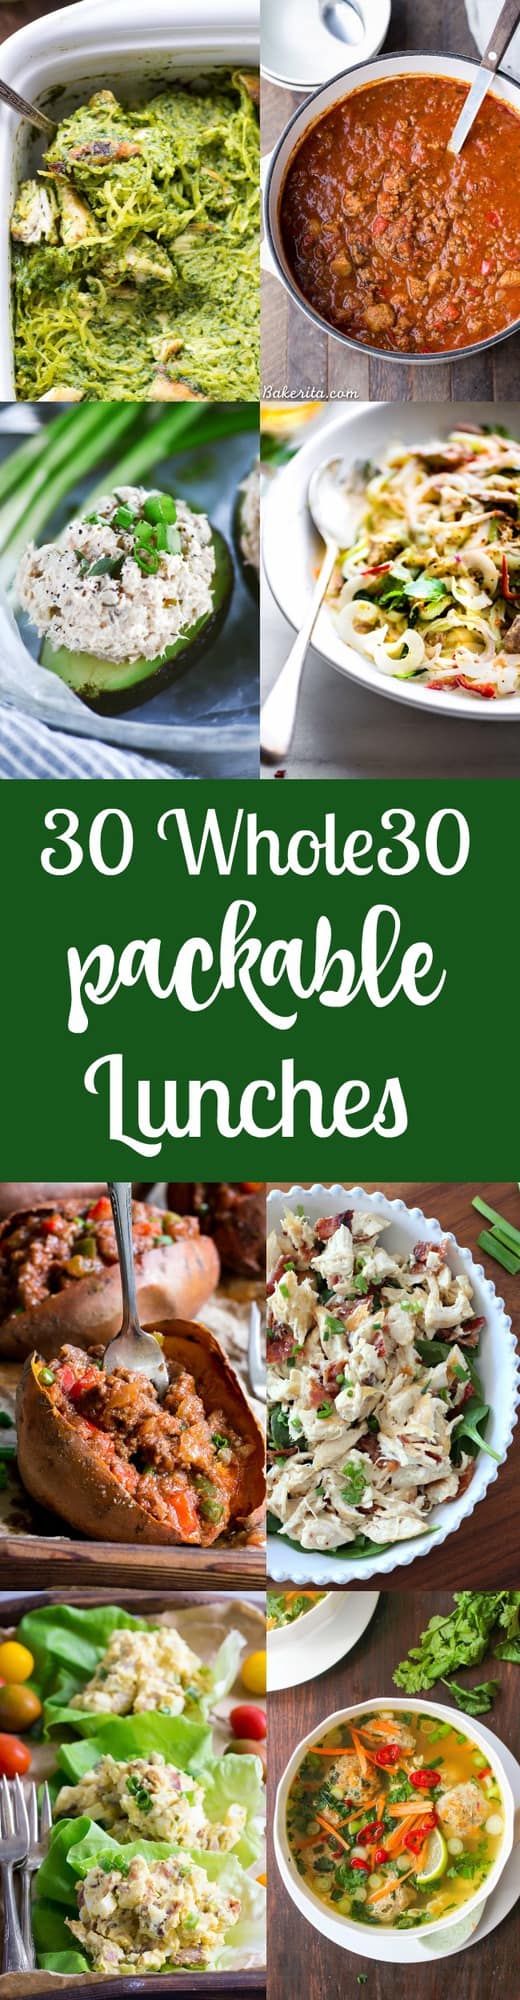 https://www.paleorunningmomma.com/wp-content/uploads/2017/08/30-whole30-packable-lunches.jpg